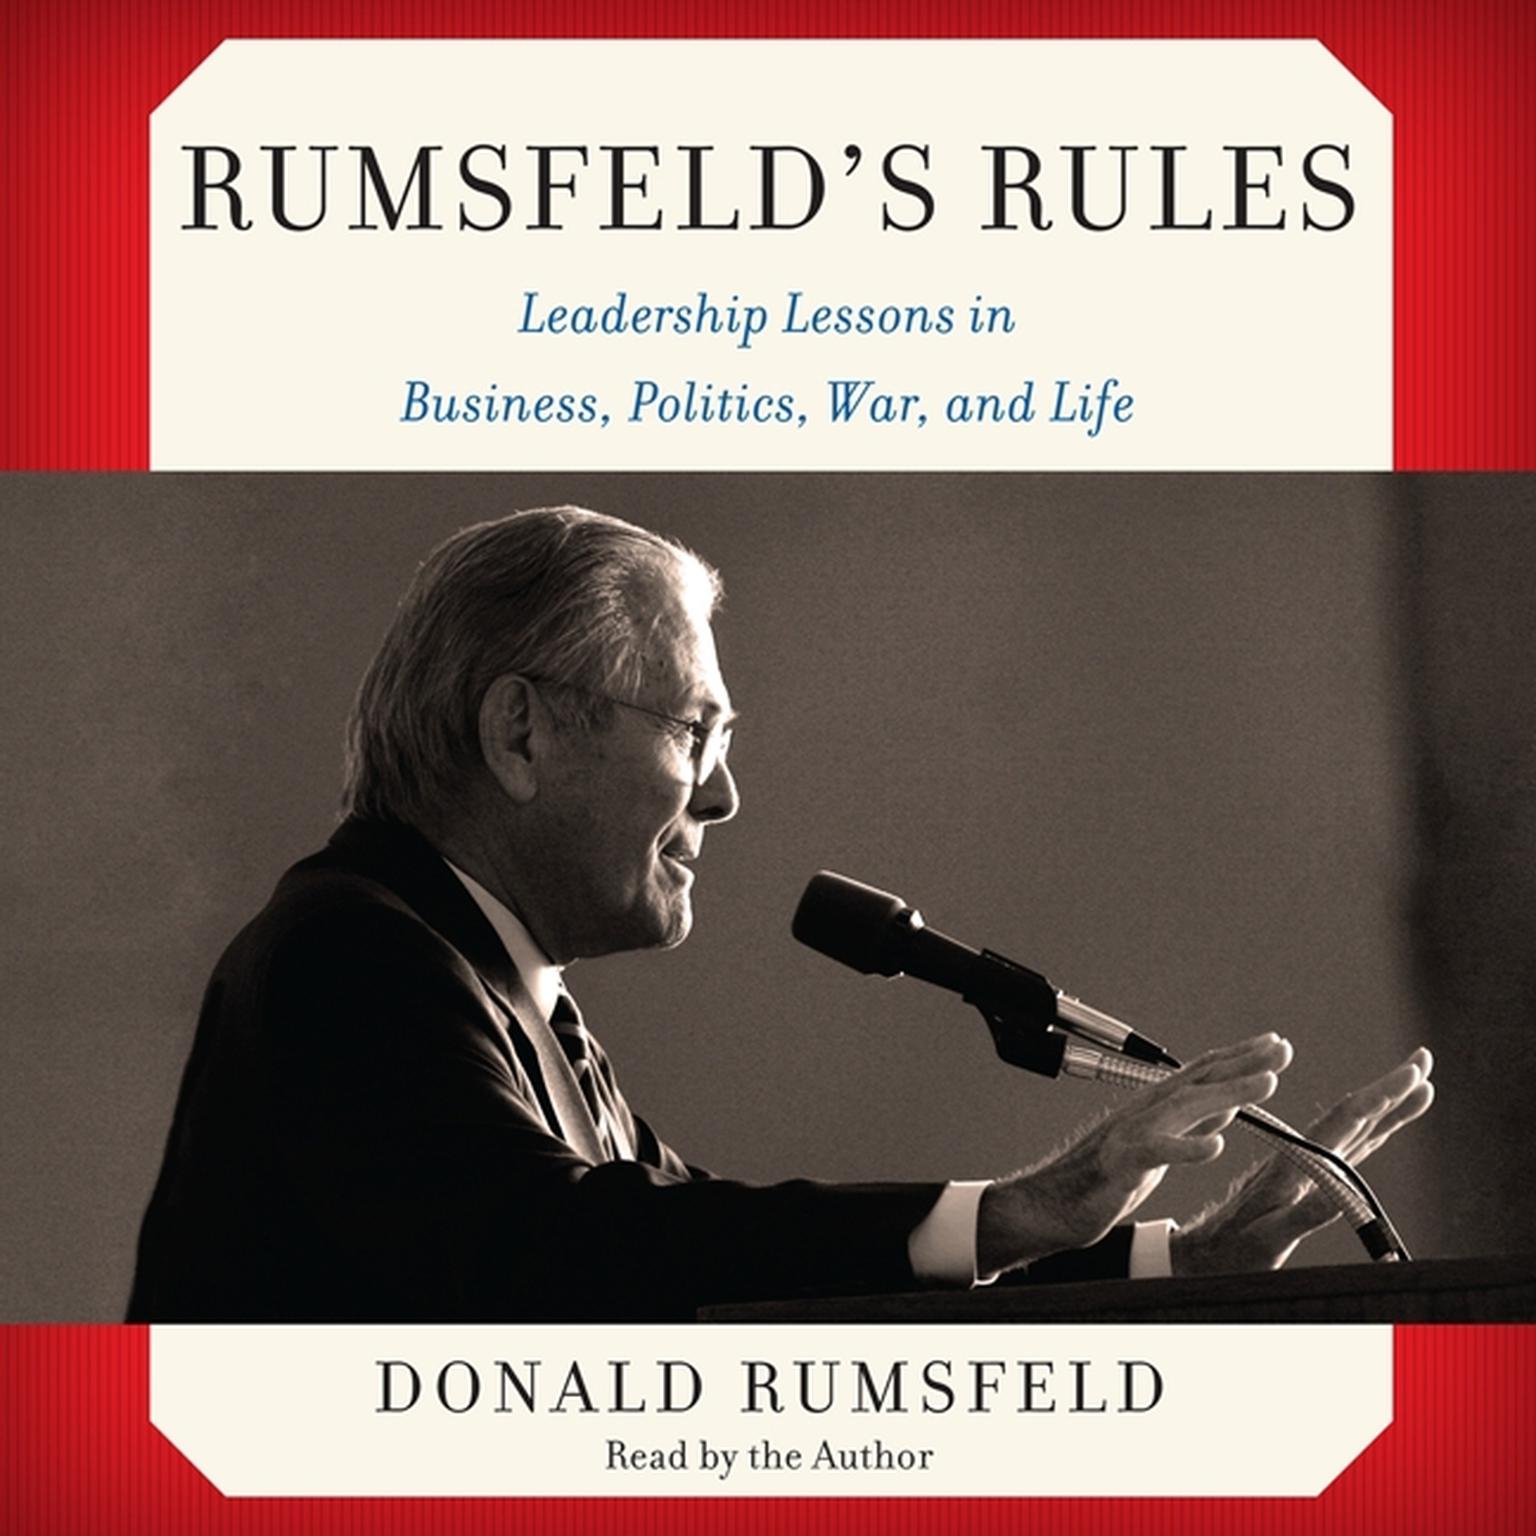 Rumsfelds Rules: Leadership Lessons in Business, Politics, War, and Life Audiobook, by Donald Rumsfeld